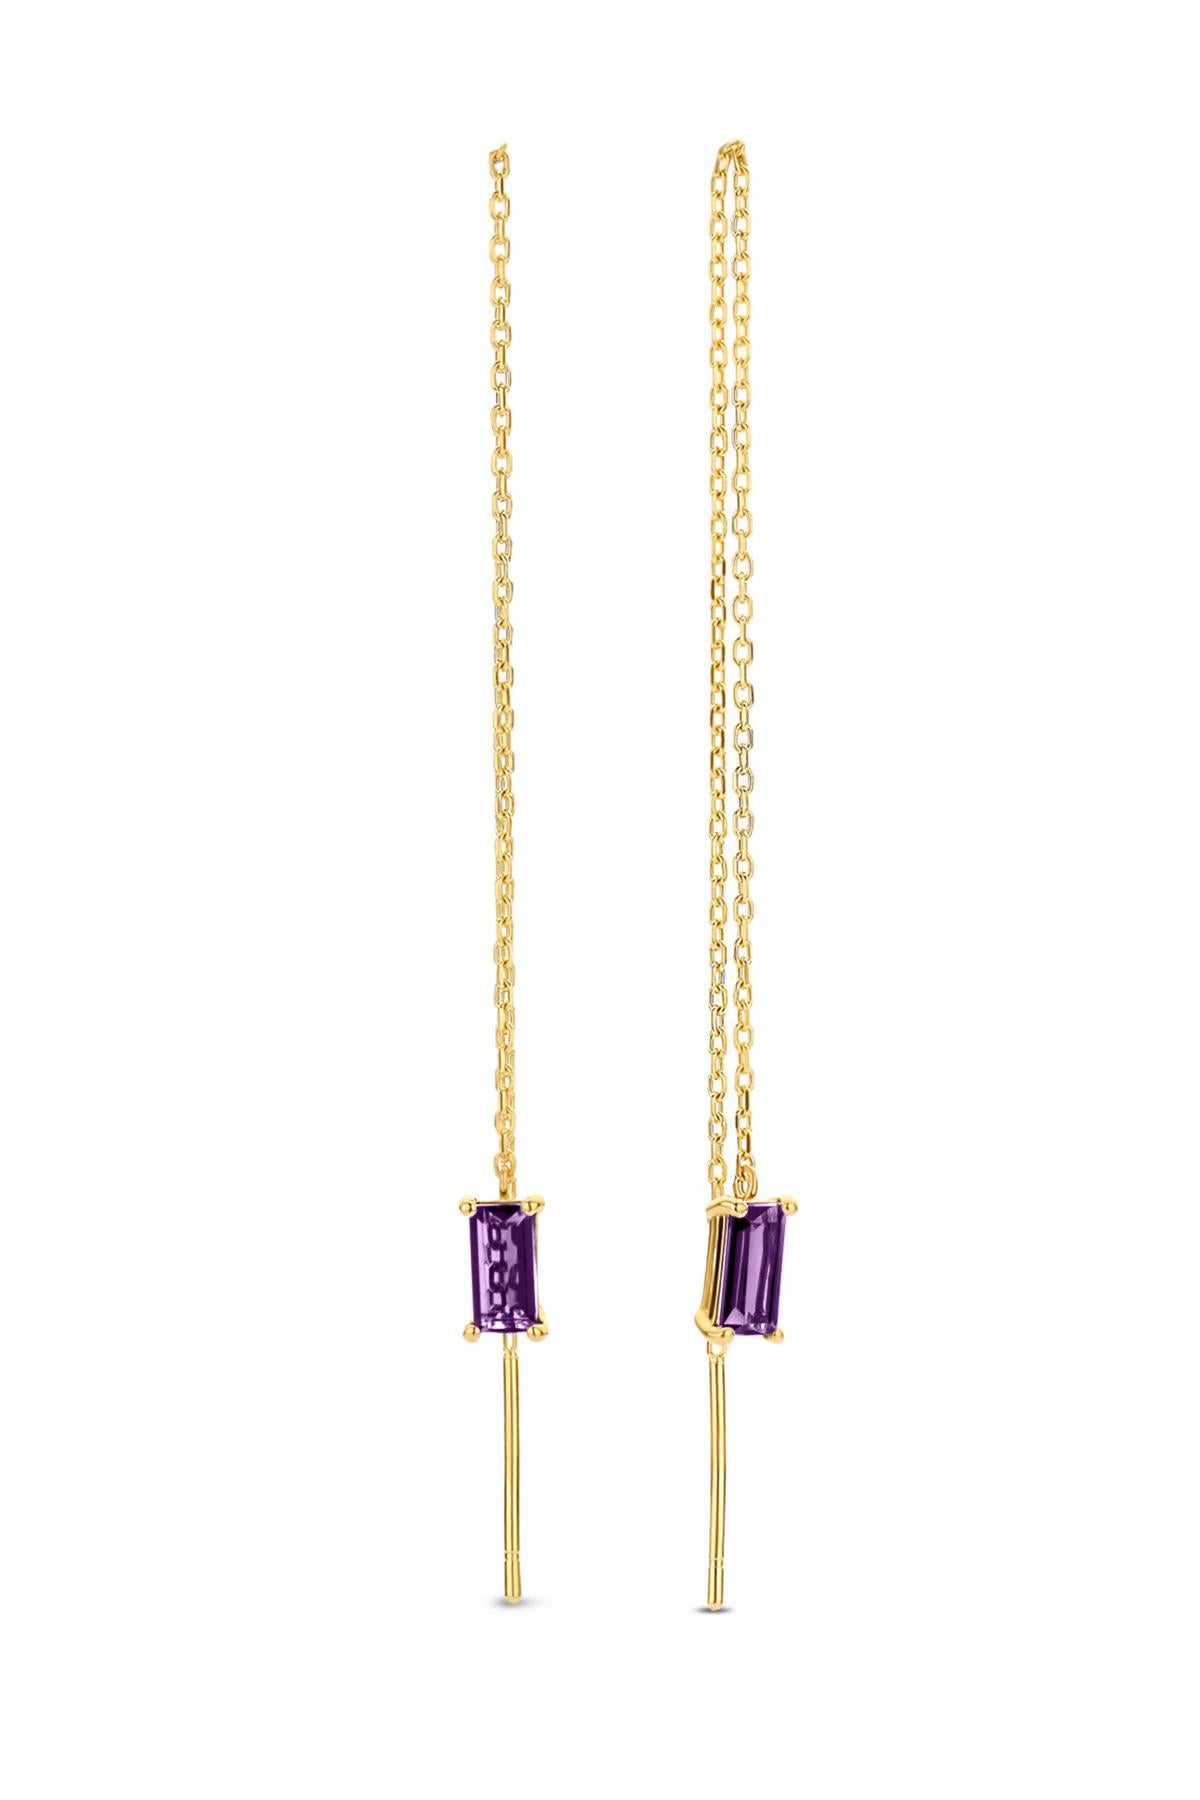 Modern 14k Solid Gold Drop Earrings with Amethysts, Chain Gold Earrings For Sale